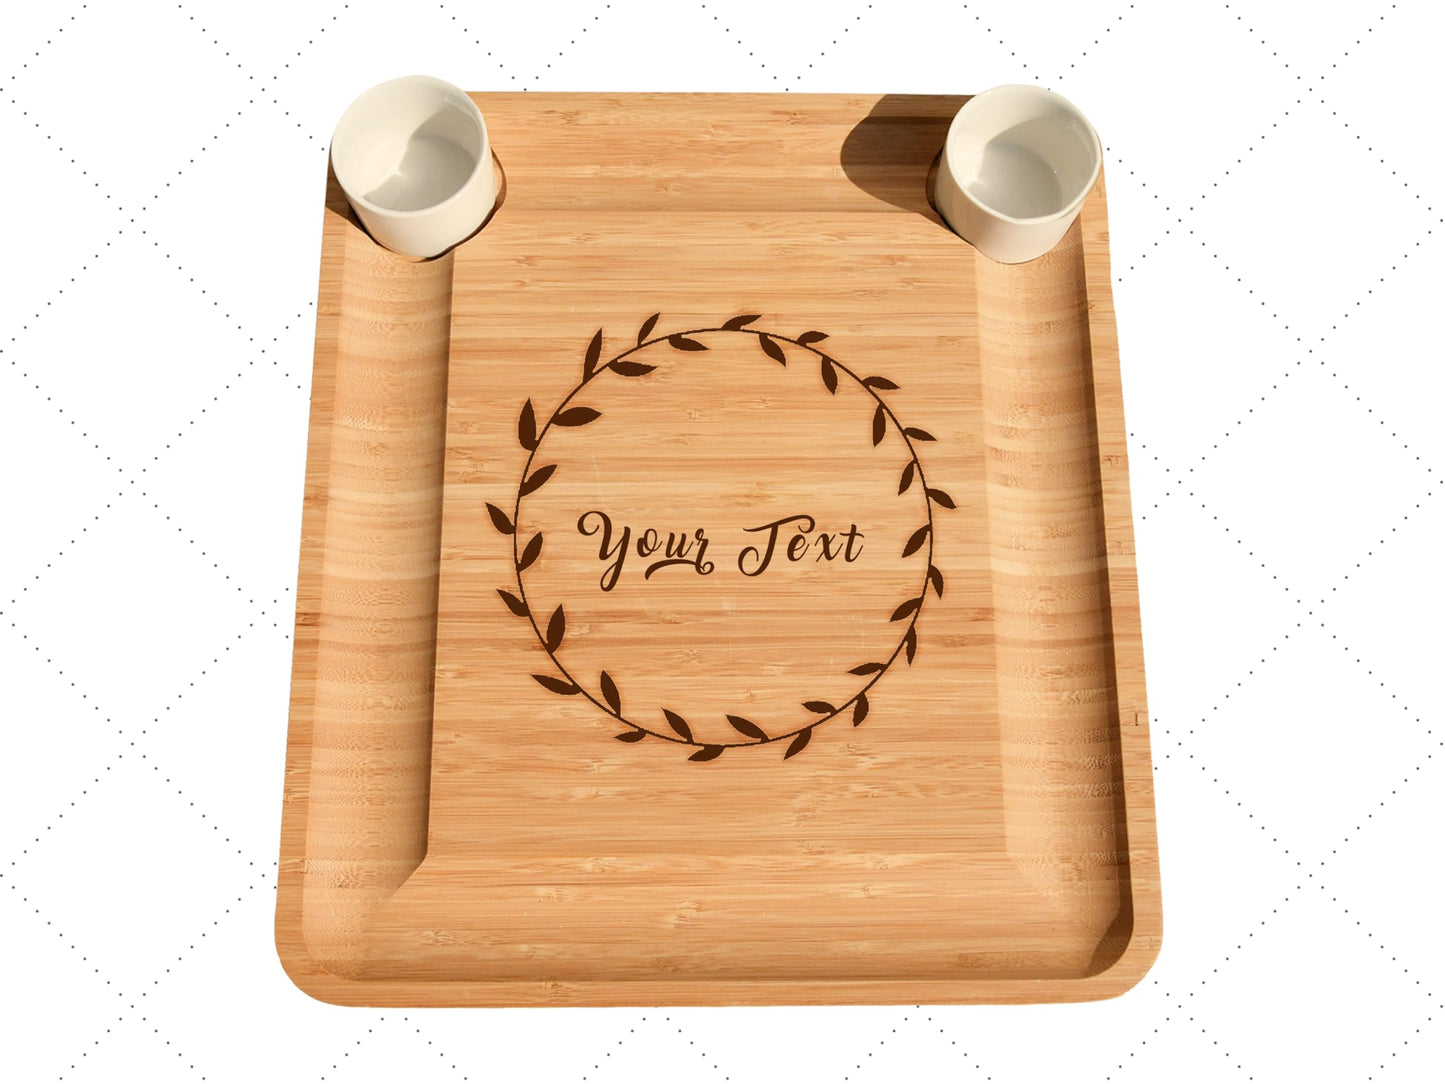 Personalized Charcuterie Board, Bamboo Cheese Board, Wedding Gifts, Housewarming Gift, Birthday Gifts for Women or Men, Custom Engraved Serving